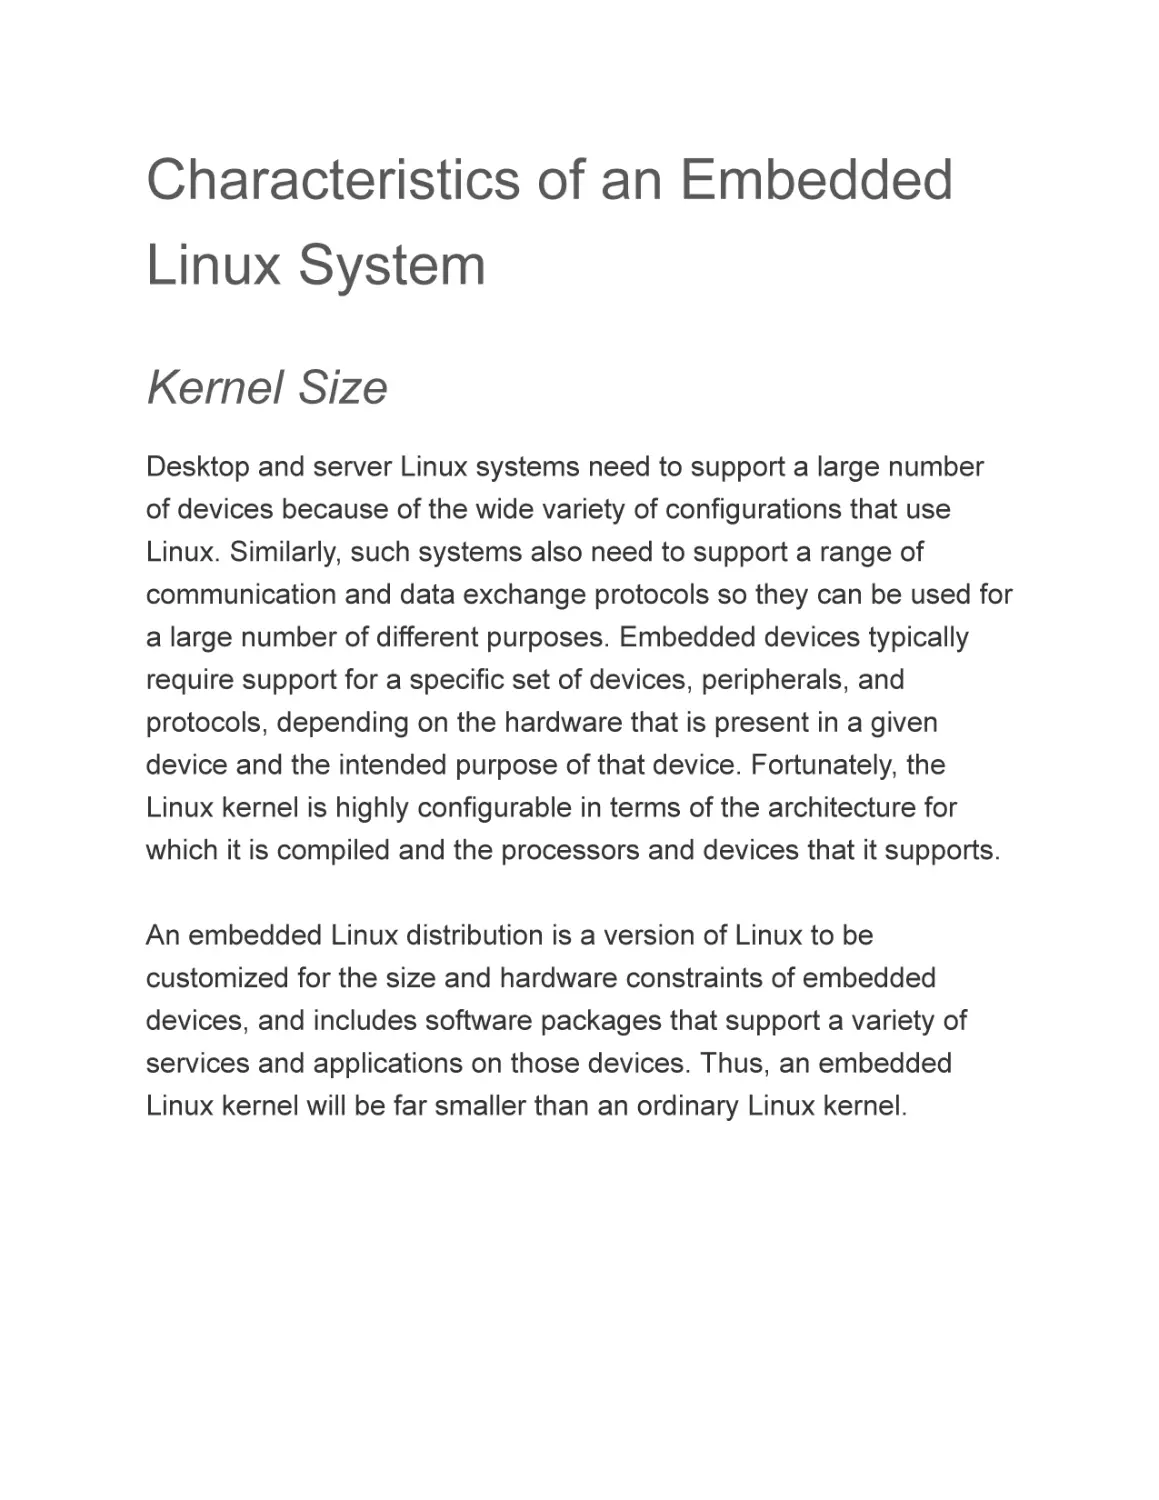 Characteristics of an Embedded Linux System
Kernel Size